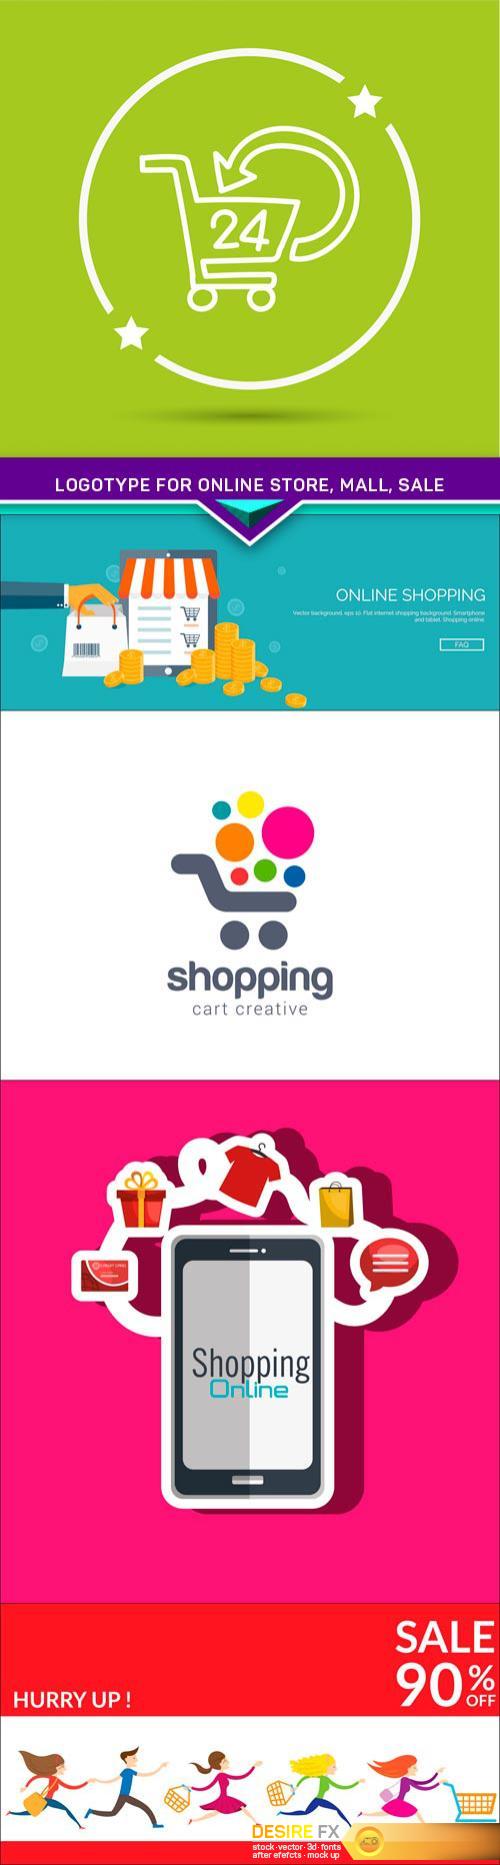 Logotype for online store, mall, sale 5X EPS